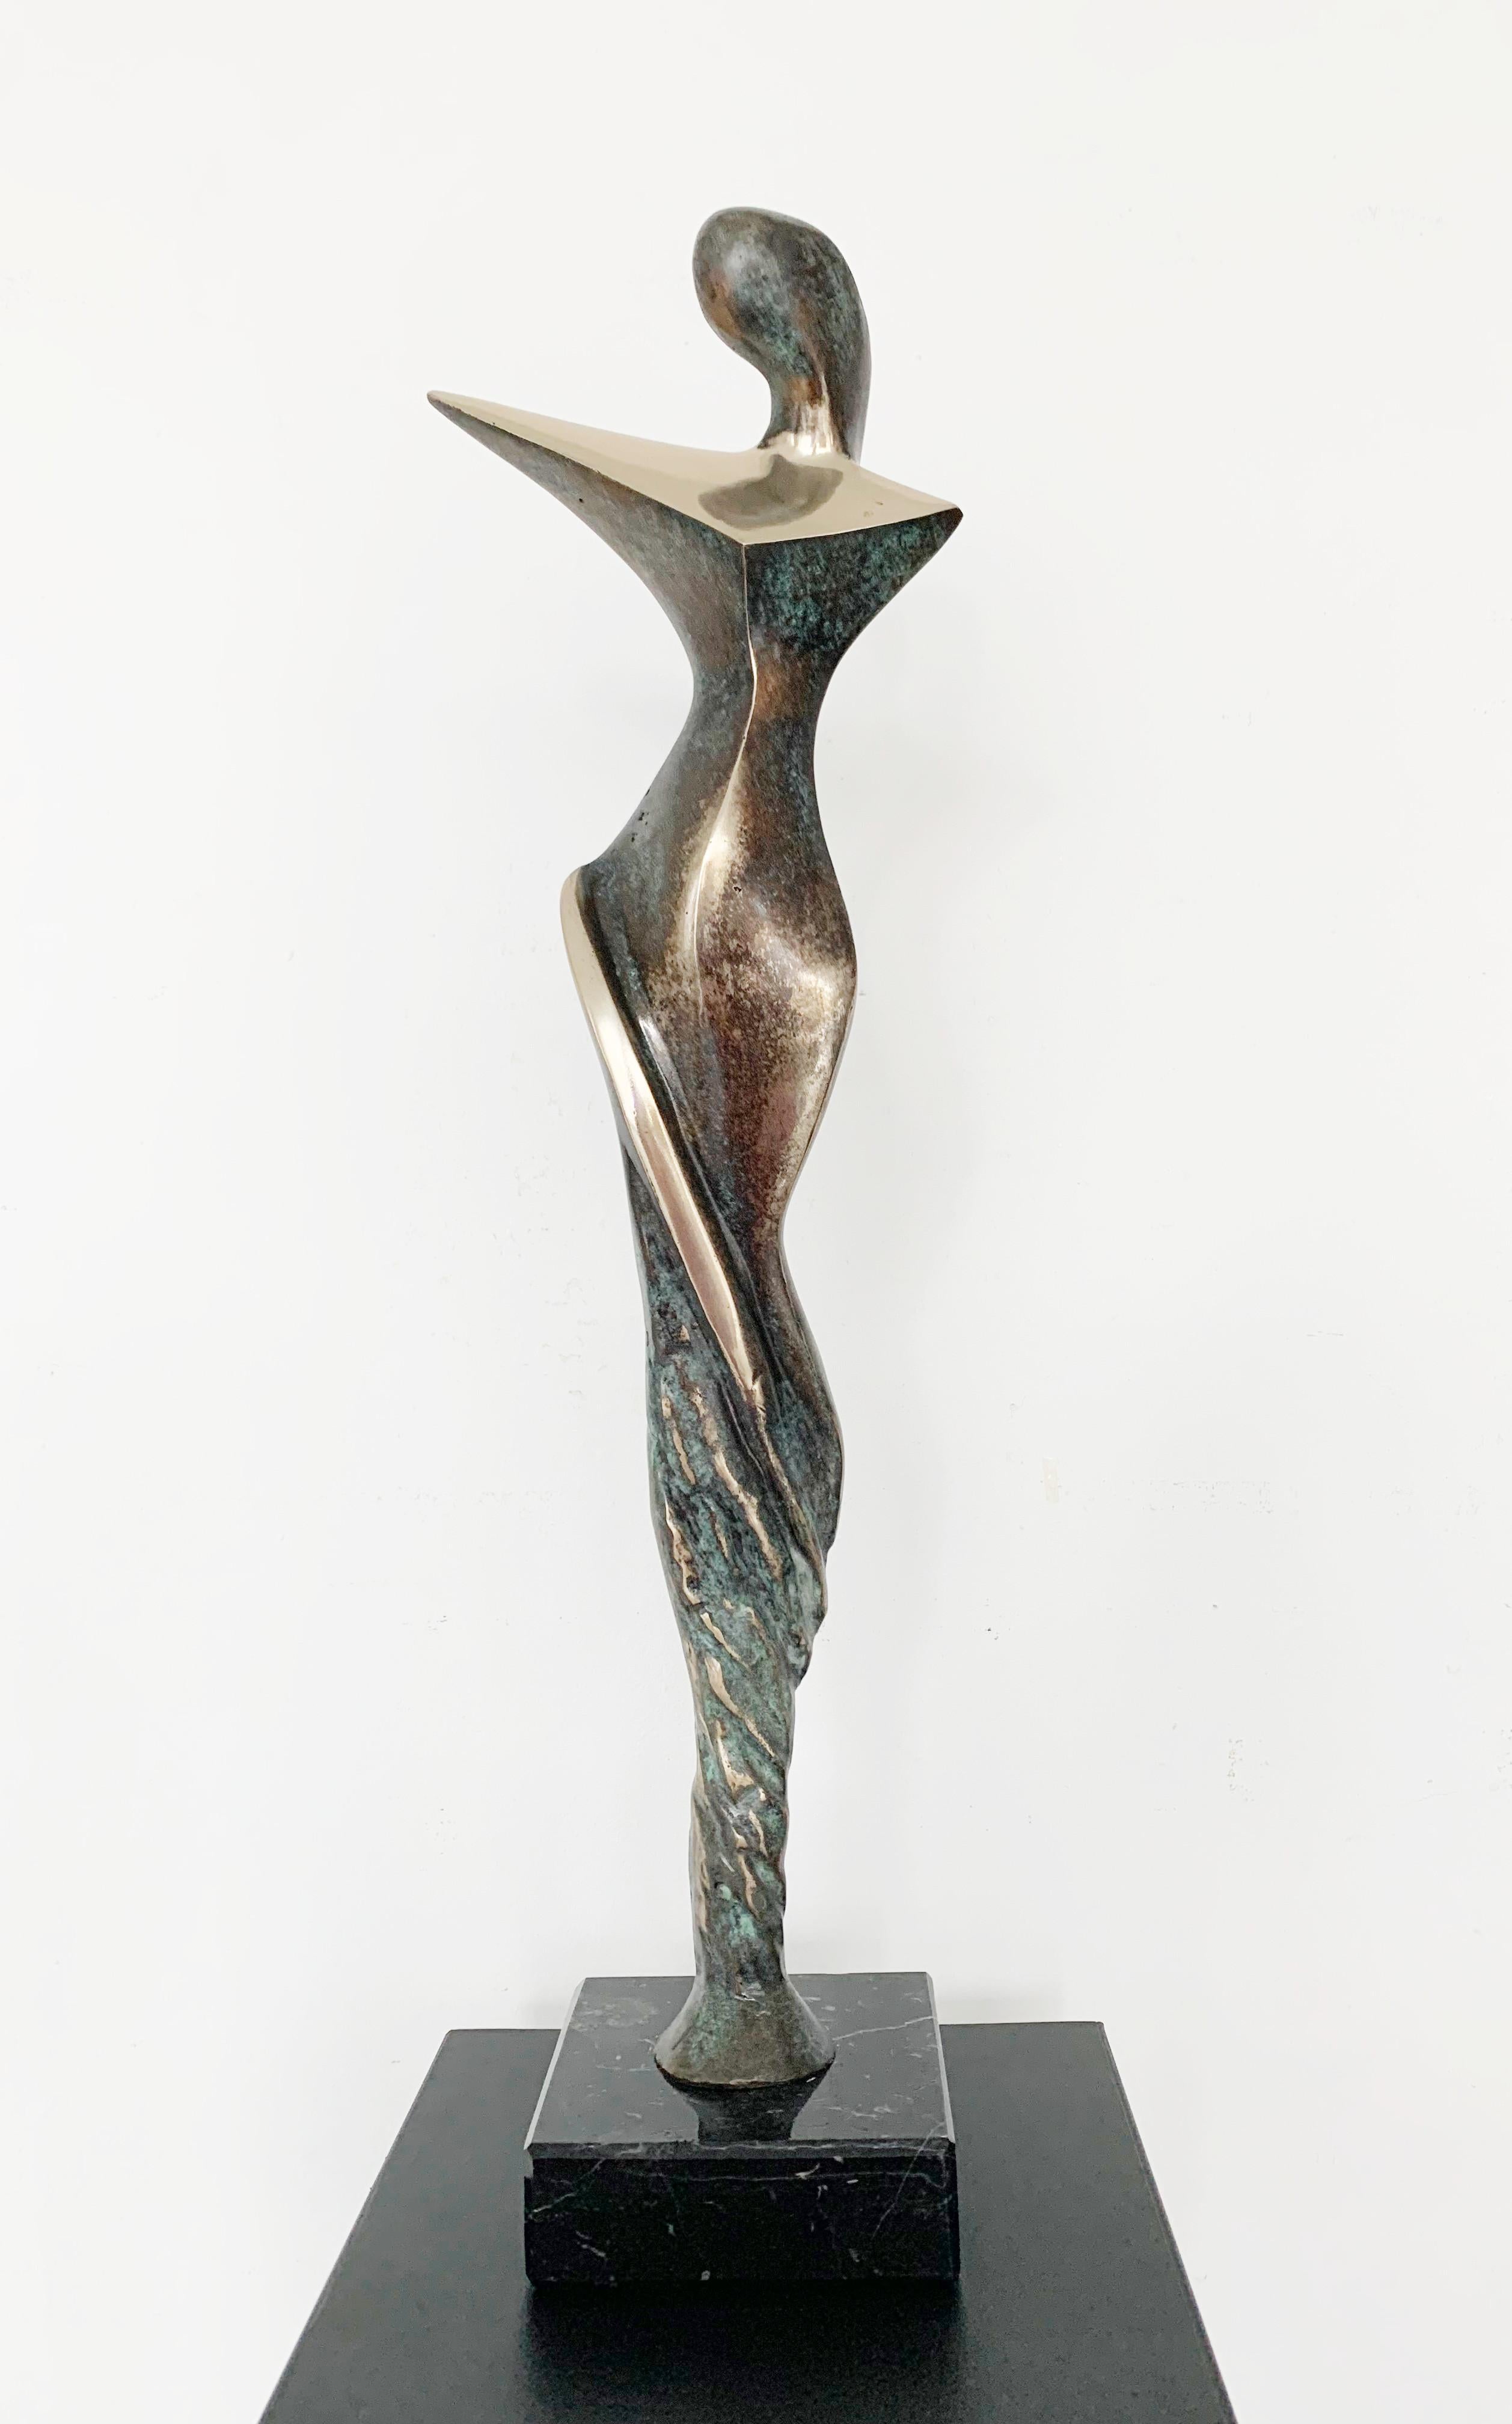 A lady. Contemporary bronze sculpture, Abstract & figurative, Polish art